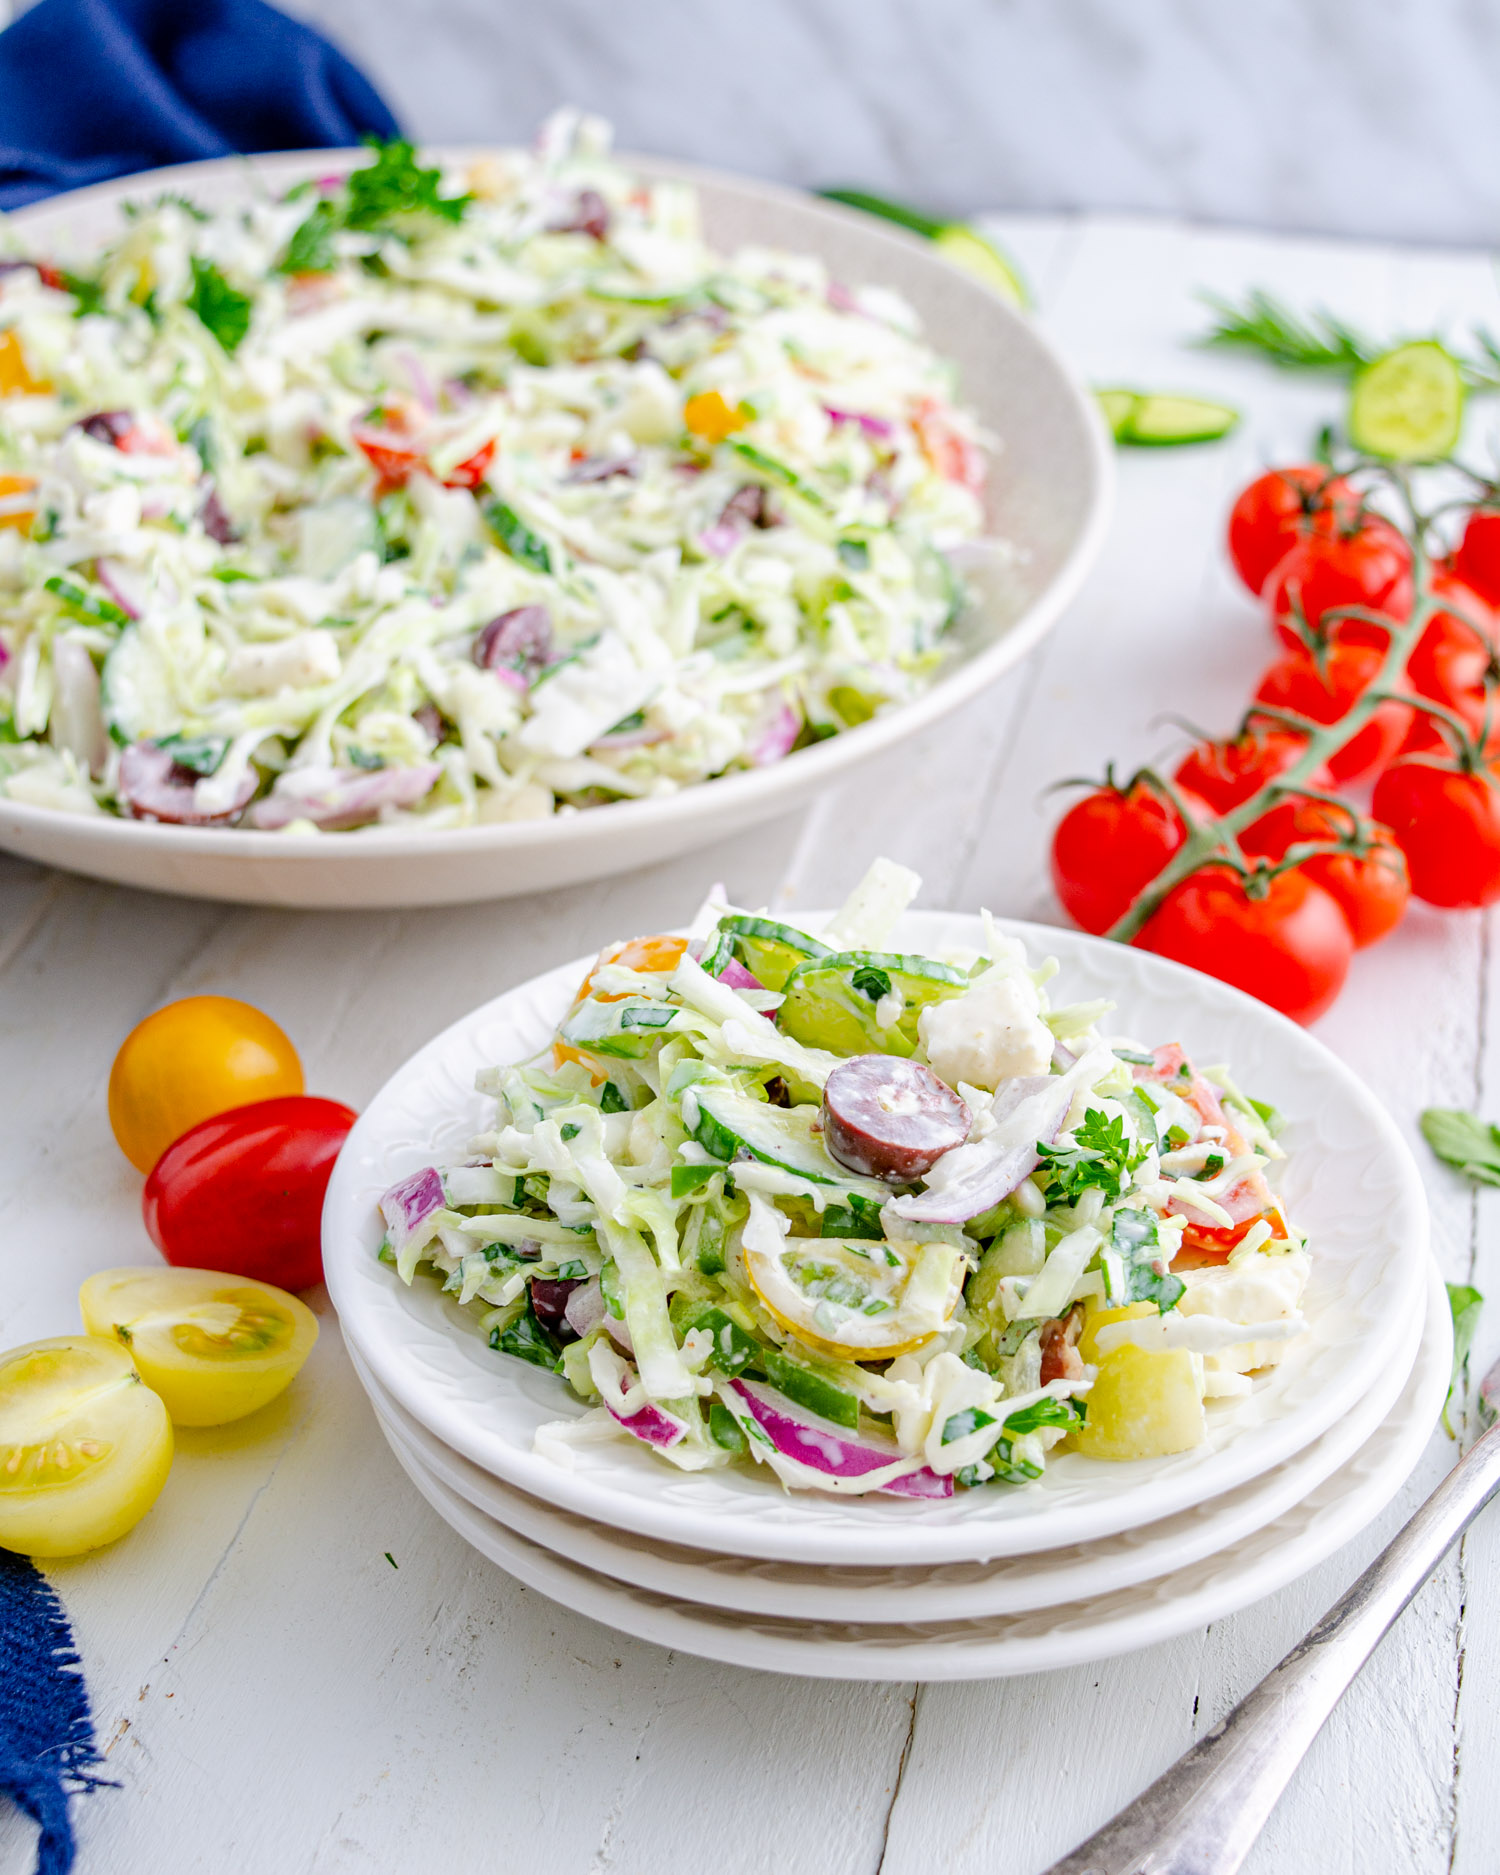 Creamy Greek style coleslaw on a white plate